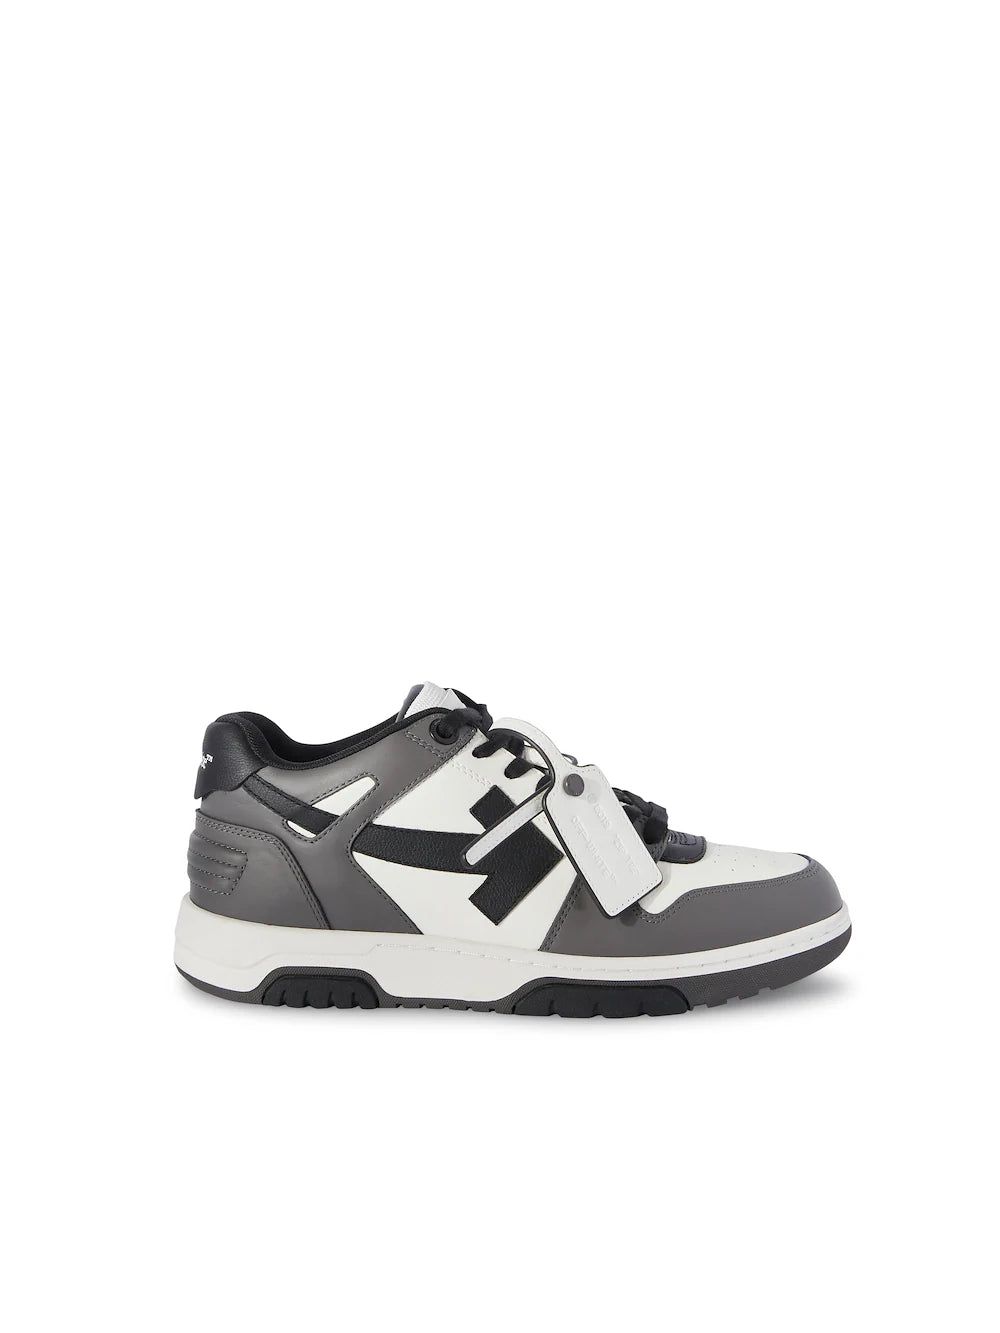 OFF-WHITE  Sneakers Out Of Office Grigio Scuro/Nero